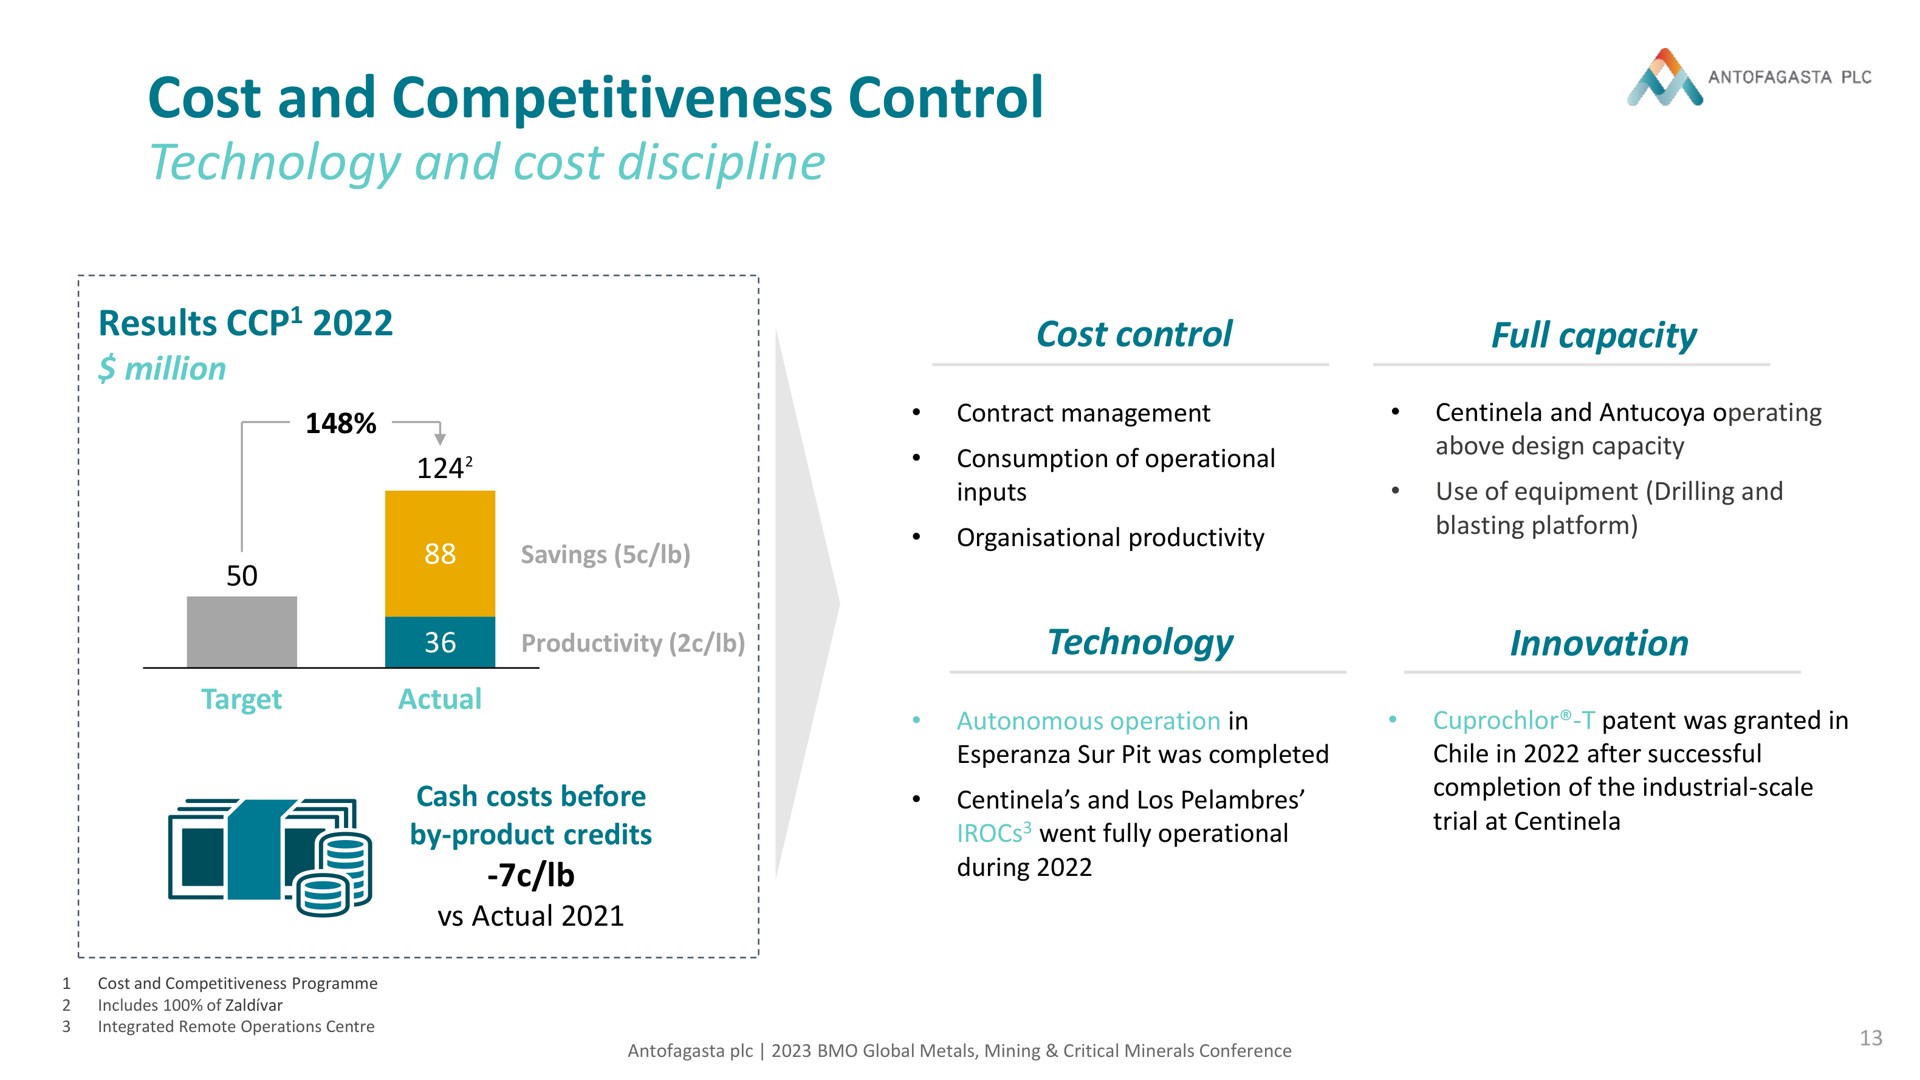 cost and competitiveness control technology discipline | Antofagasta